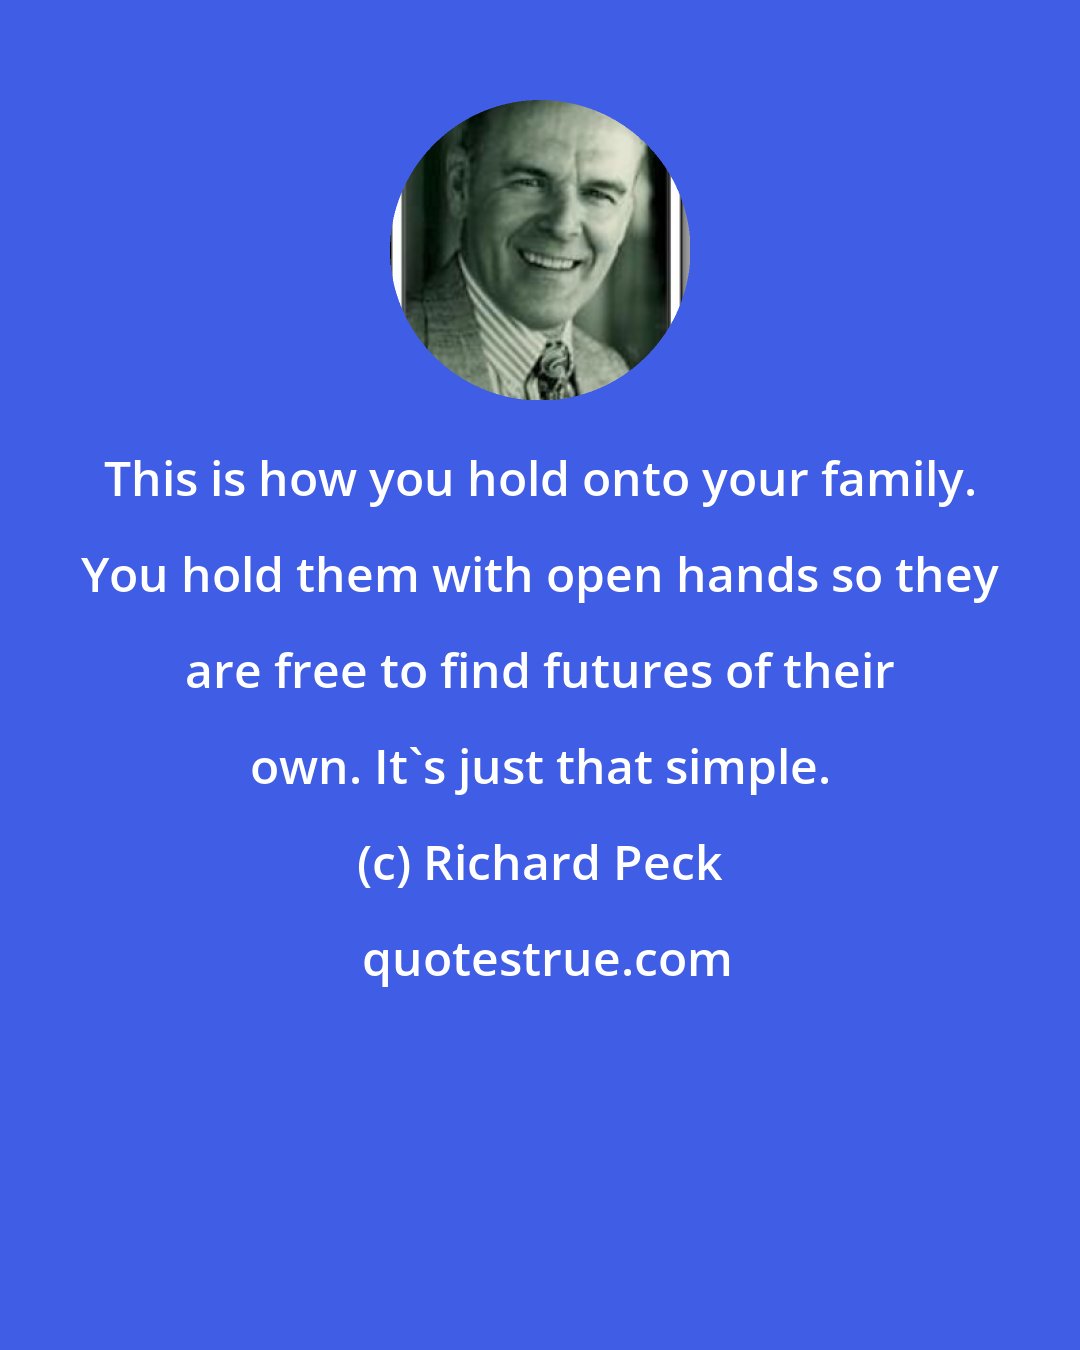 Richard Peck: This is how you hold onto your family. You hold them with open hands so they are free to find futures of their own. It's just that simple.